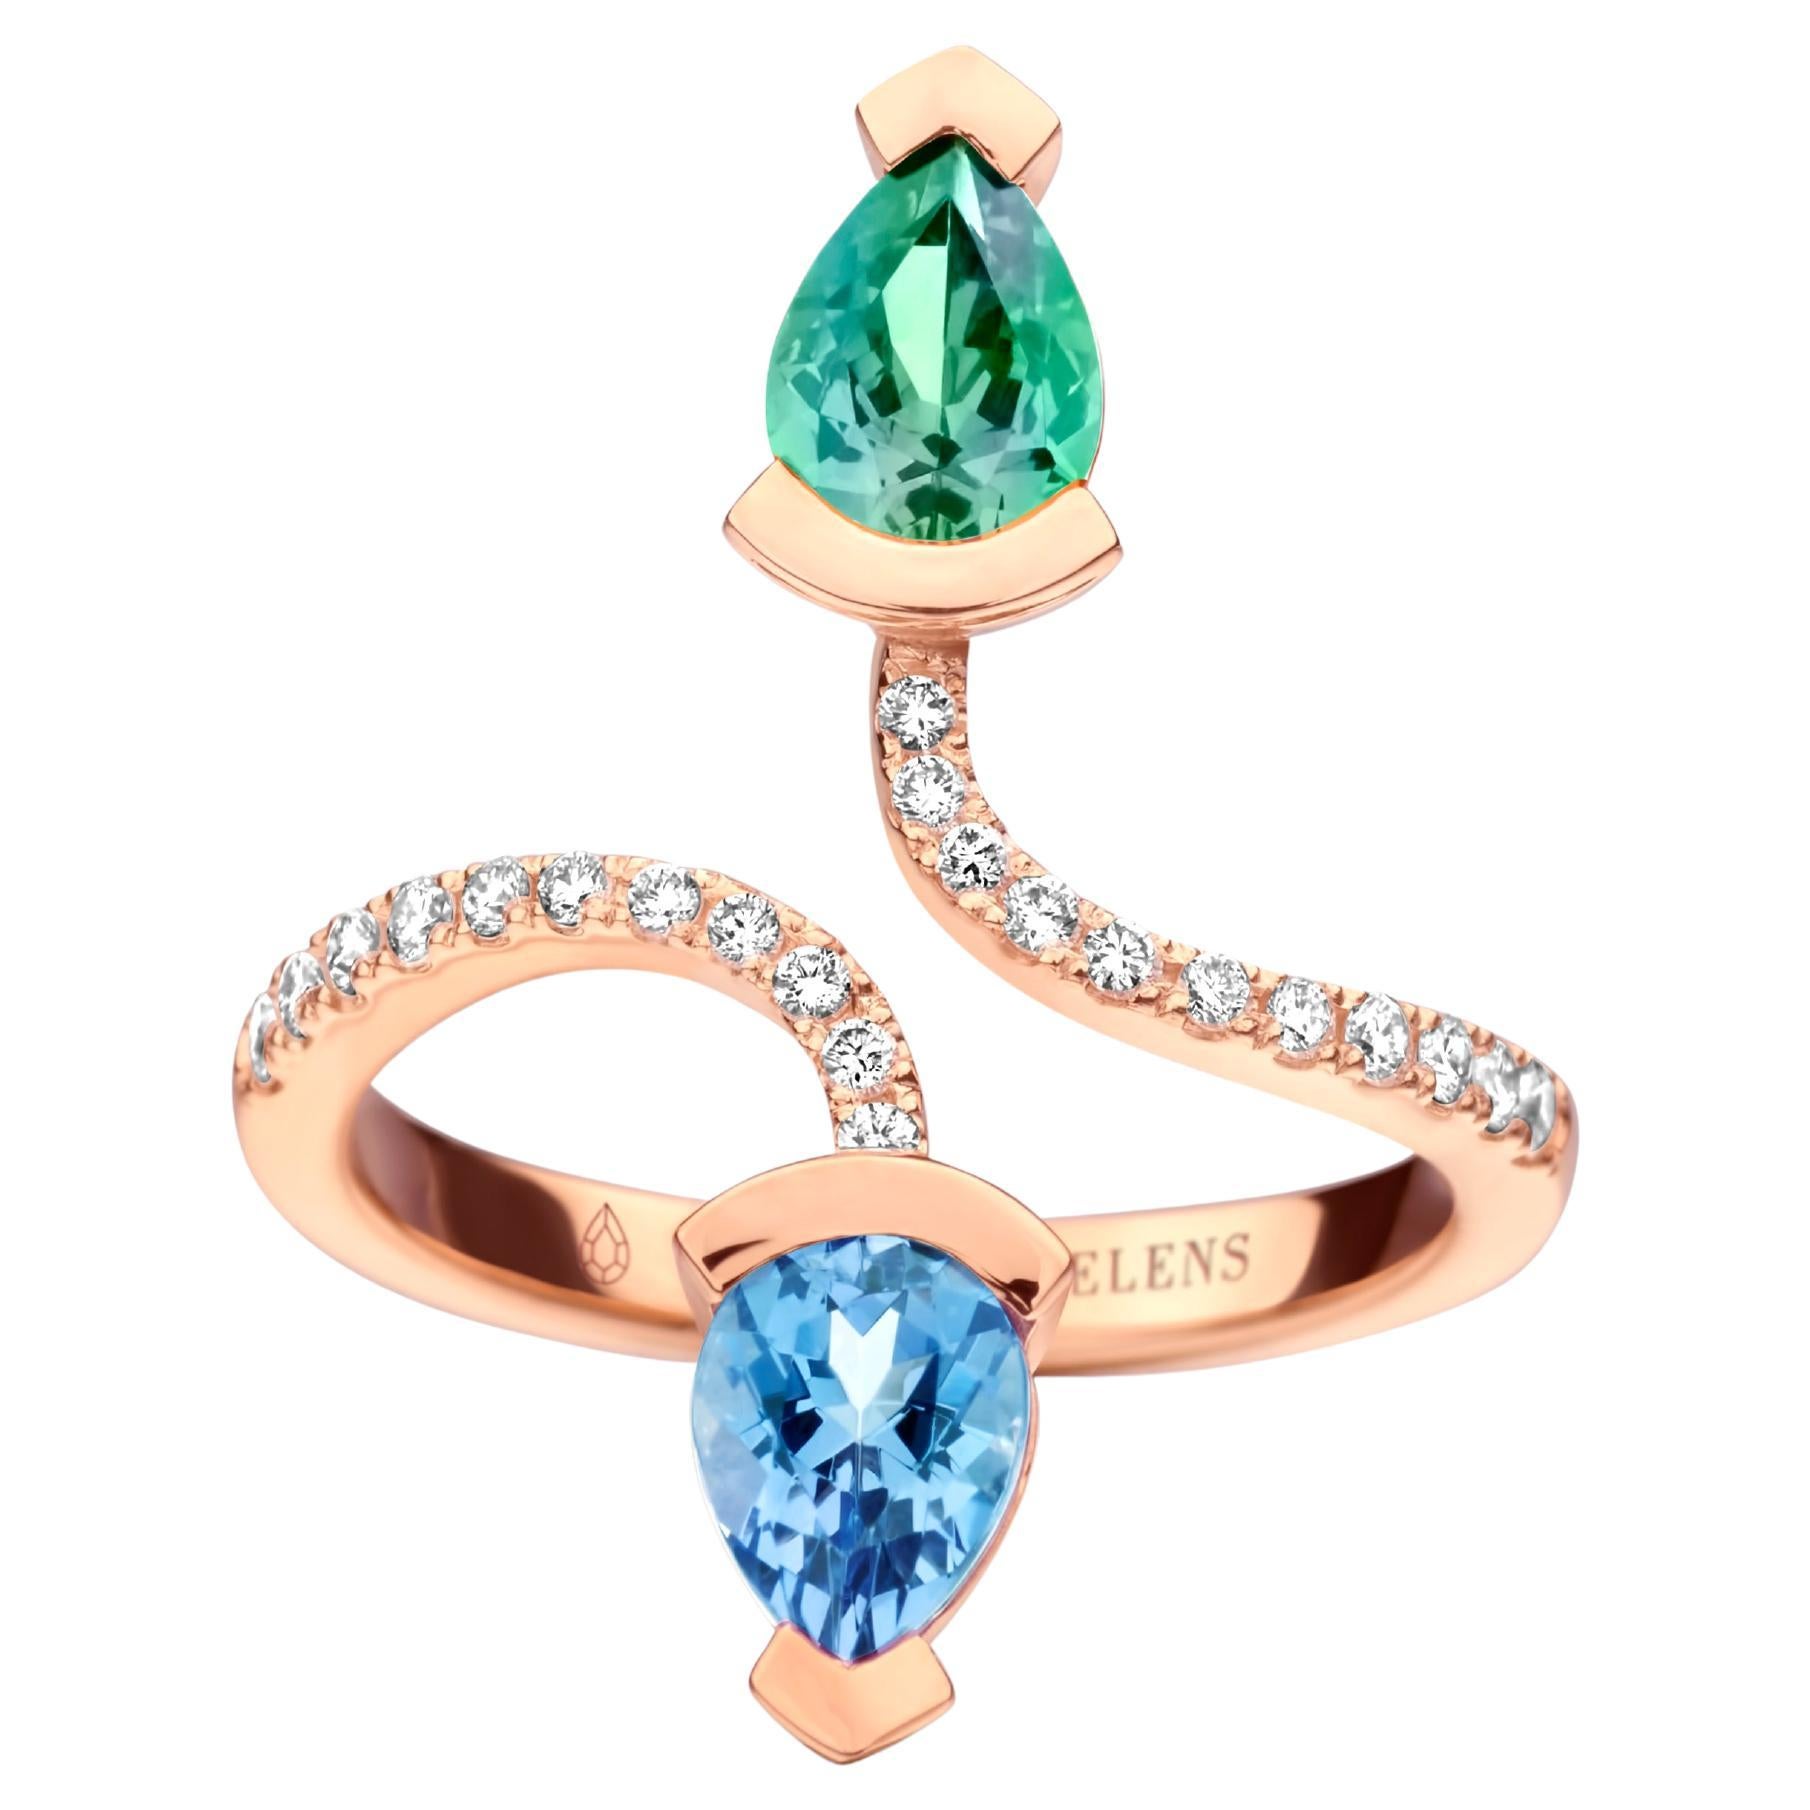 0.78Ct Mint Tourmaline And 0.70Ct Aquamarine 18K Rose Gold Diamond Cocktail Ring For Sale